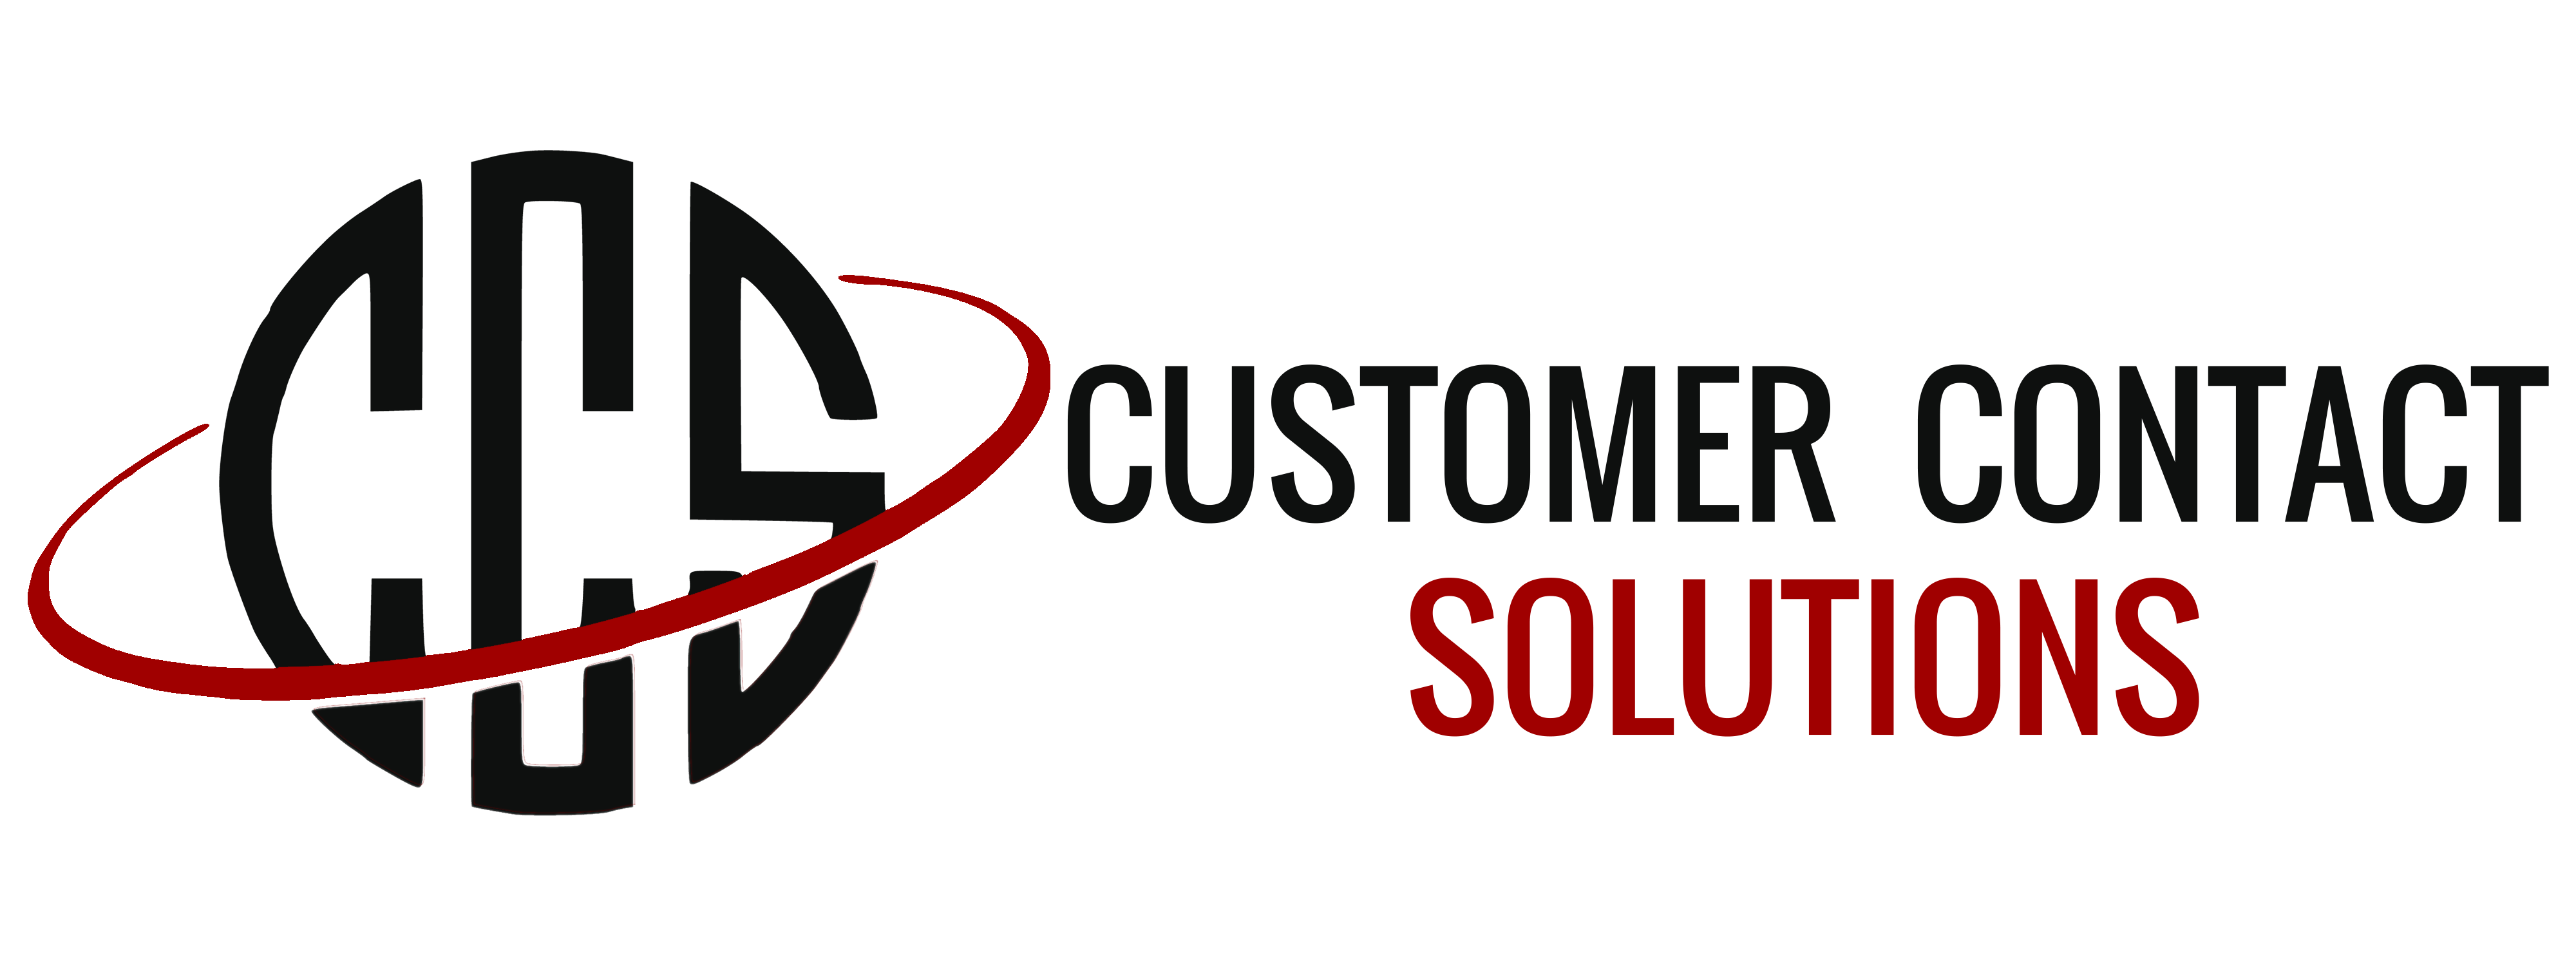 Customer Contact Solutions – 4.9% & $0.30